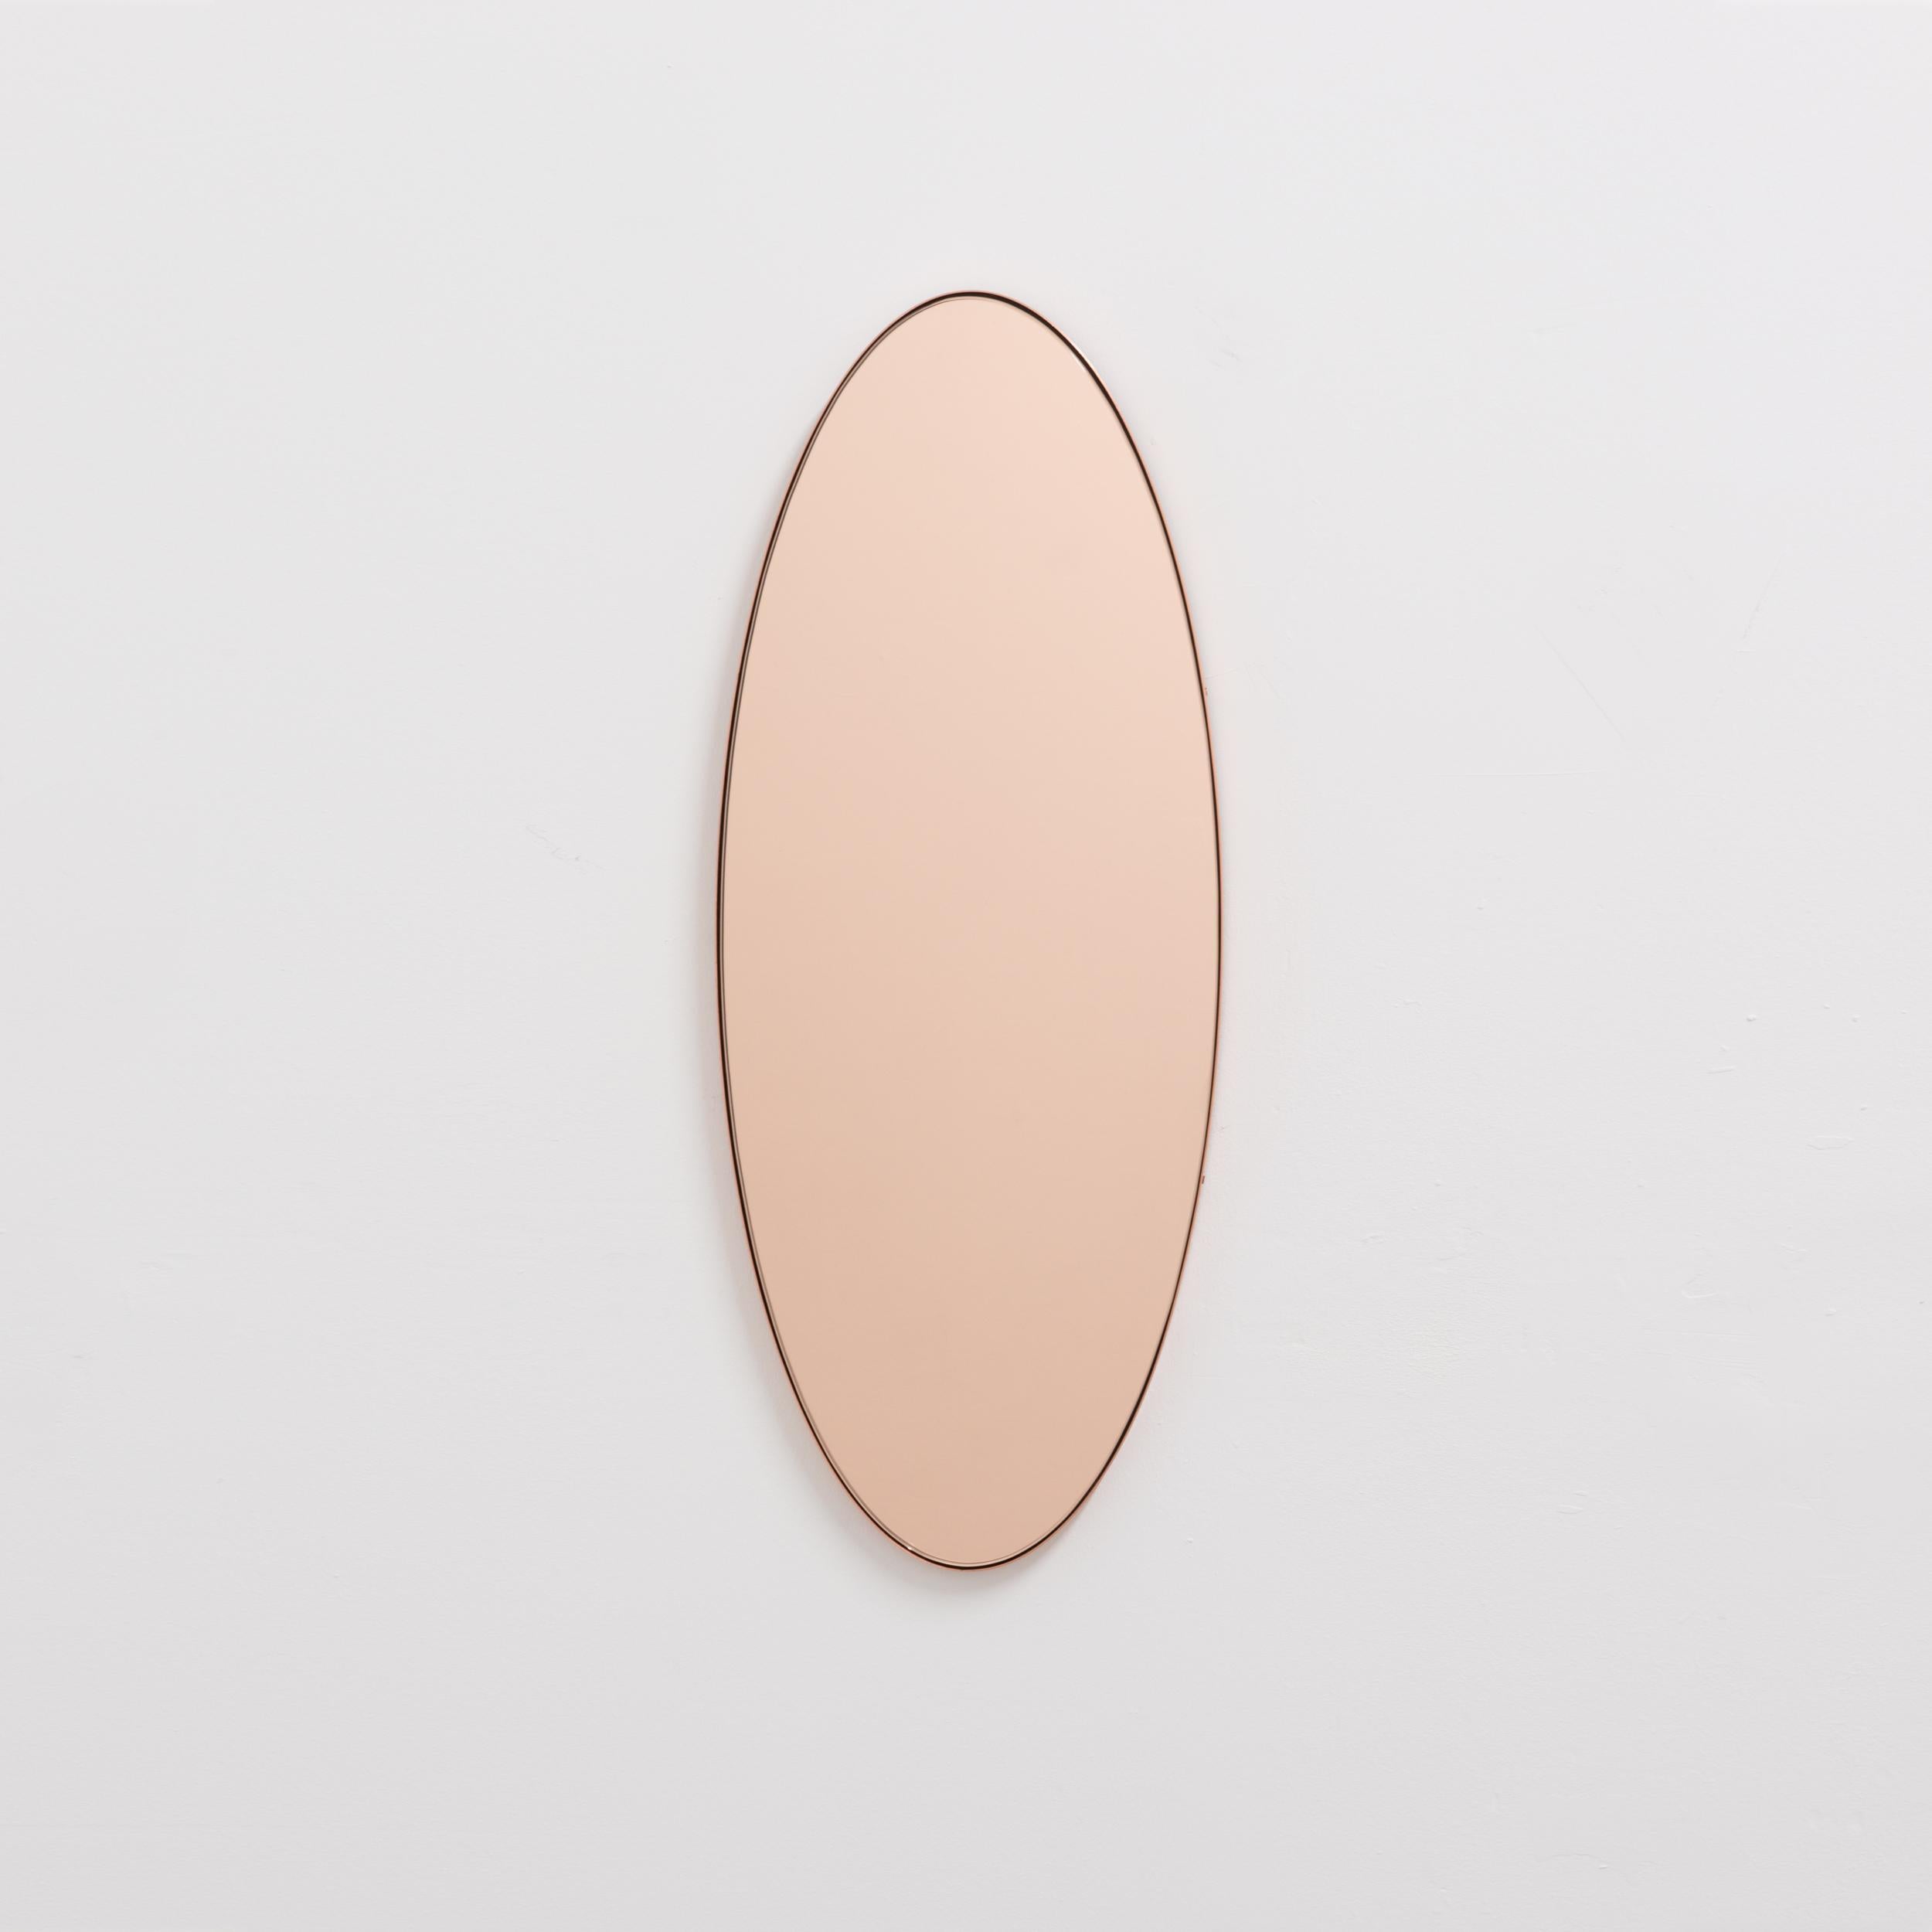 Contemporary oval shaped rose gold/peach mirror with an elegant copper frame. Designed and handcrafted in London, UK. Supplied fully fitted with a specialist hanging system for an easy installation.

Medium, large and extra-large (37cm x 56cm, 46cm